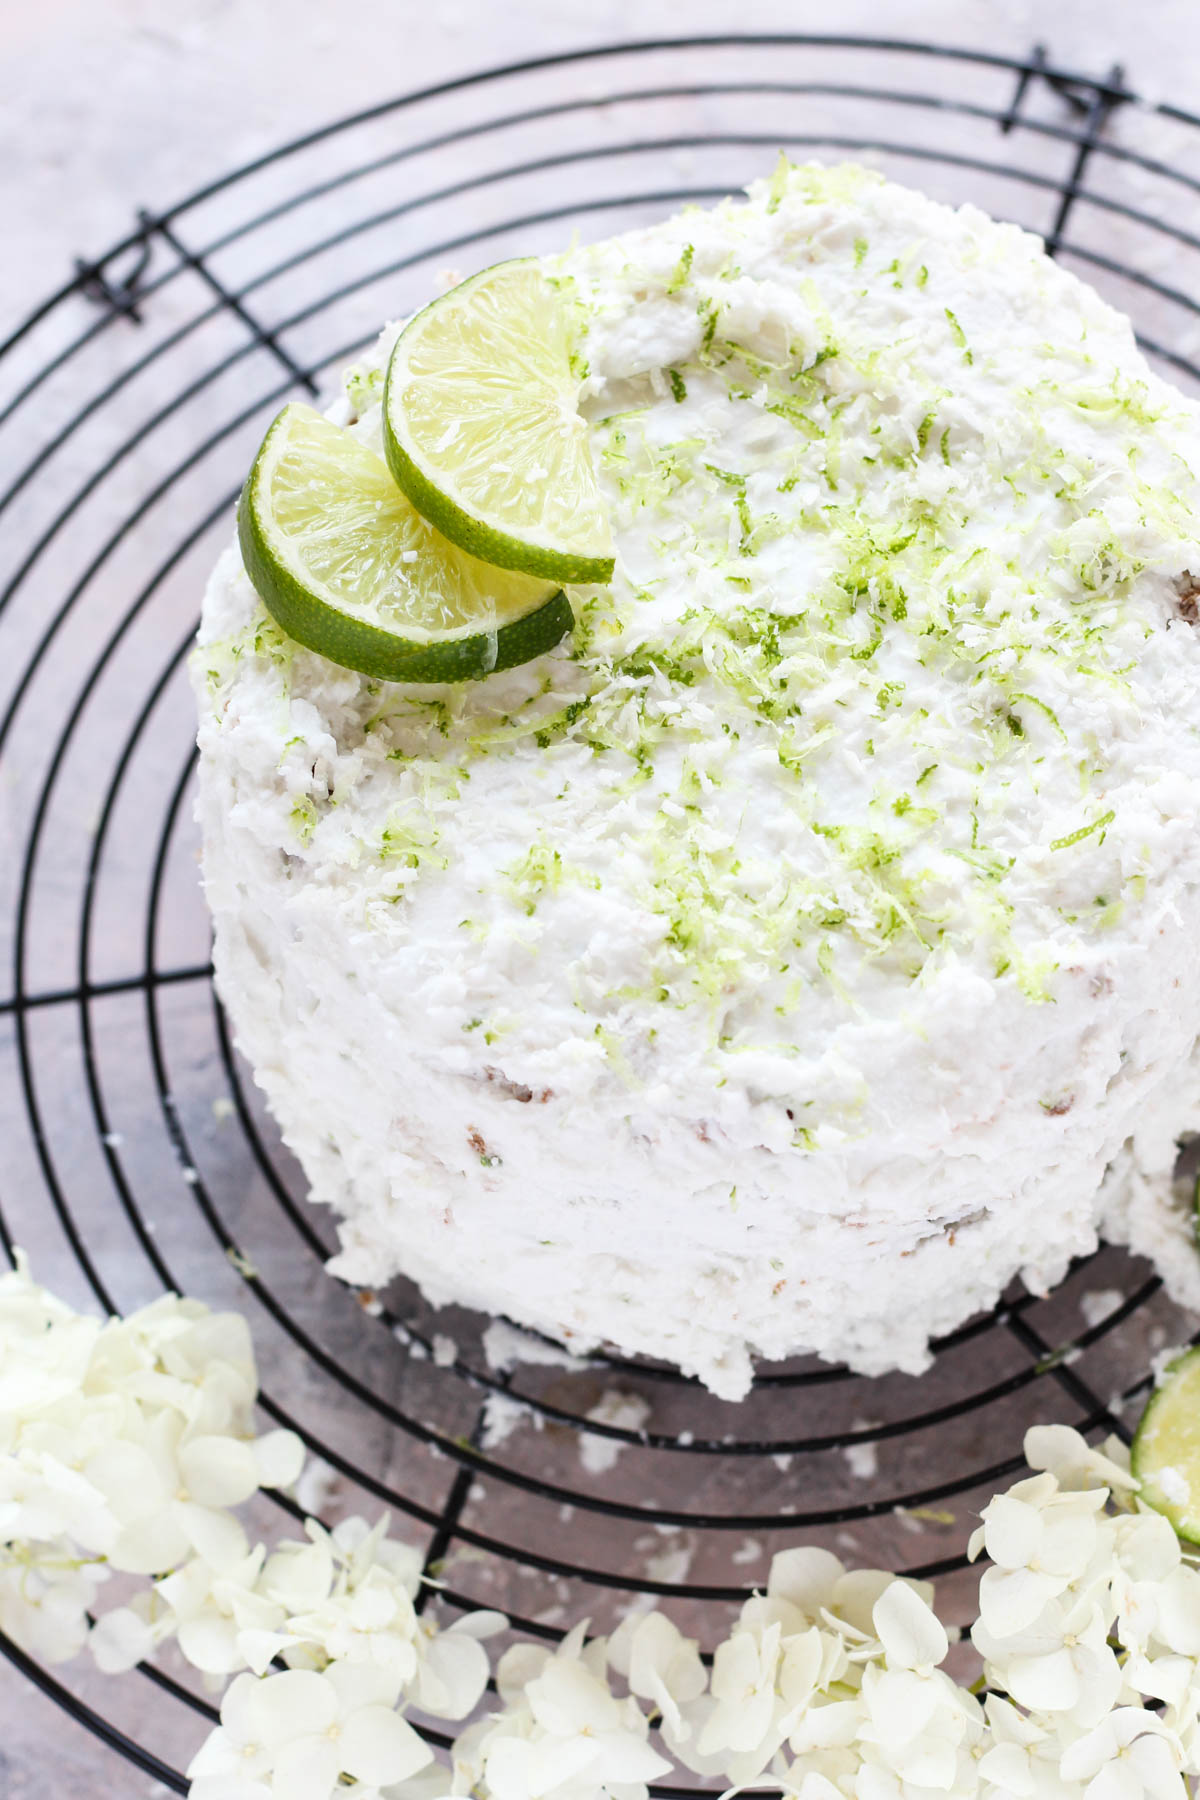 Frosted cake on metal rack with limes sliced on top.